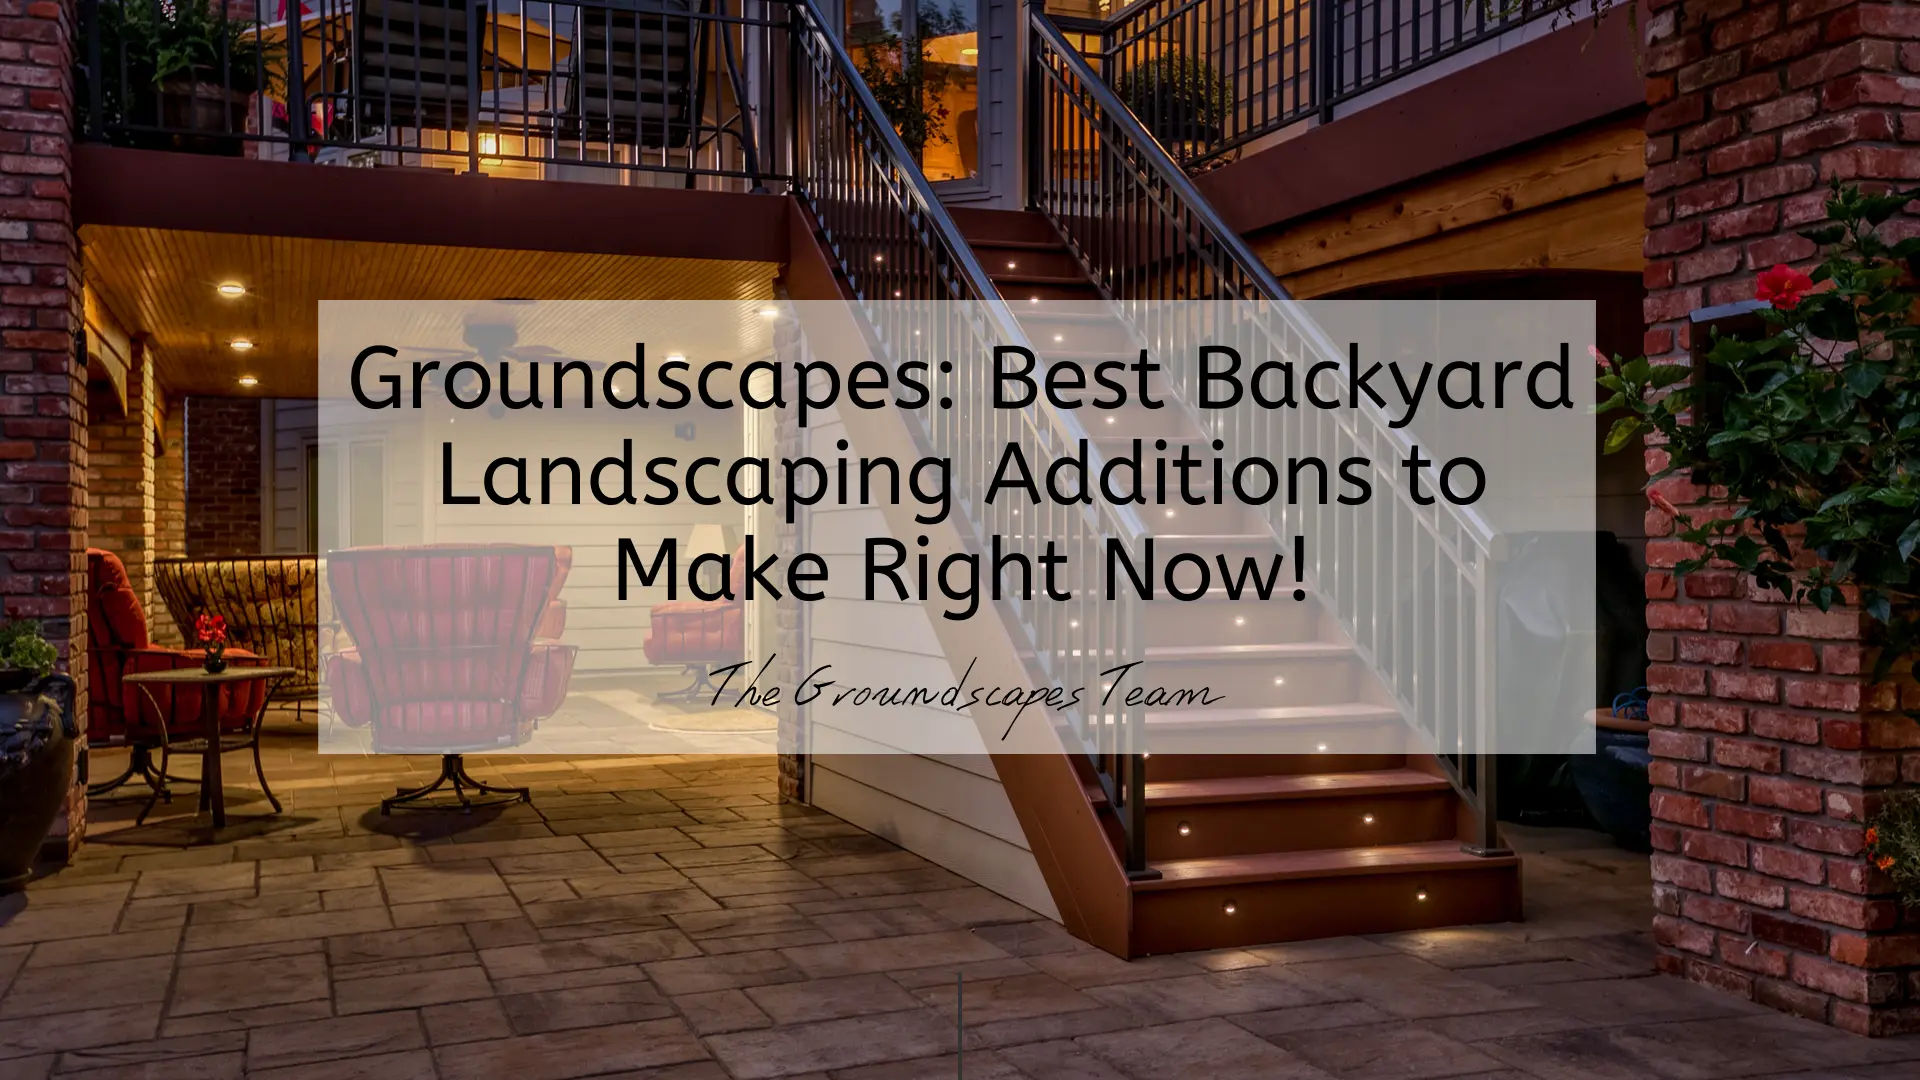 Groundscapes: Best Backyard Landscaping Additions to Make Right Now!